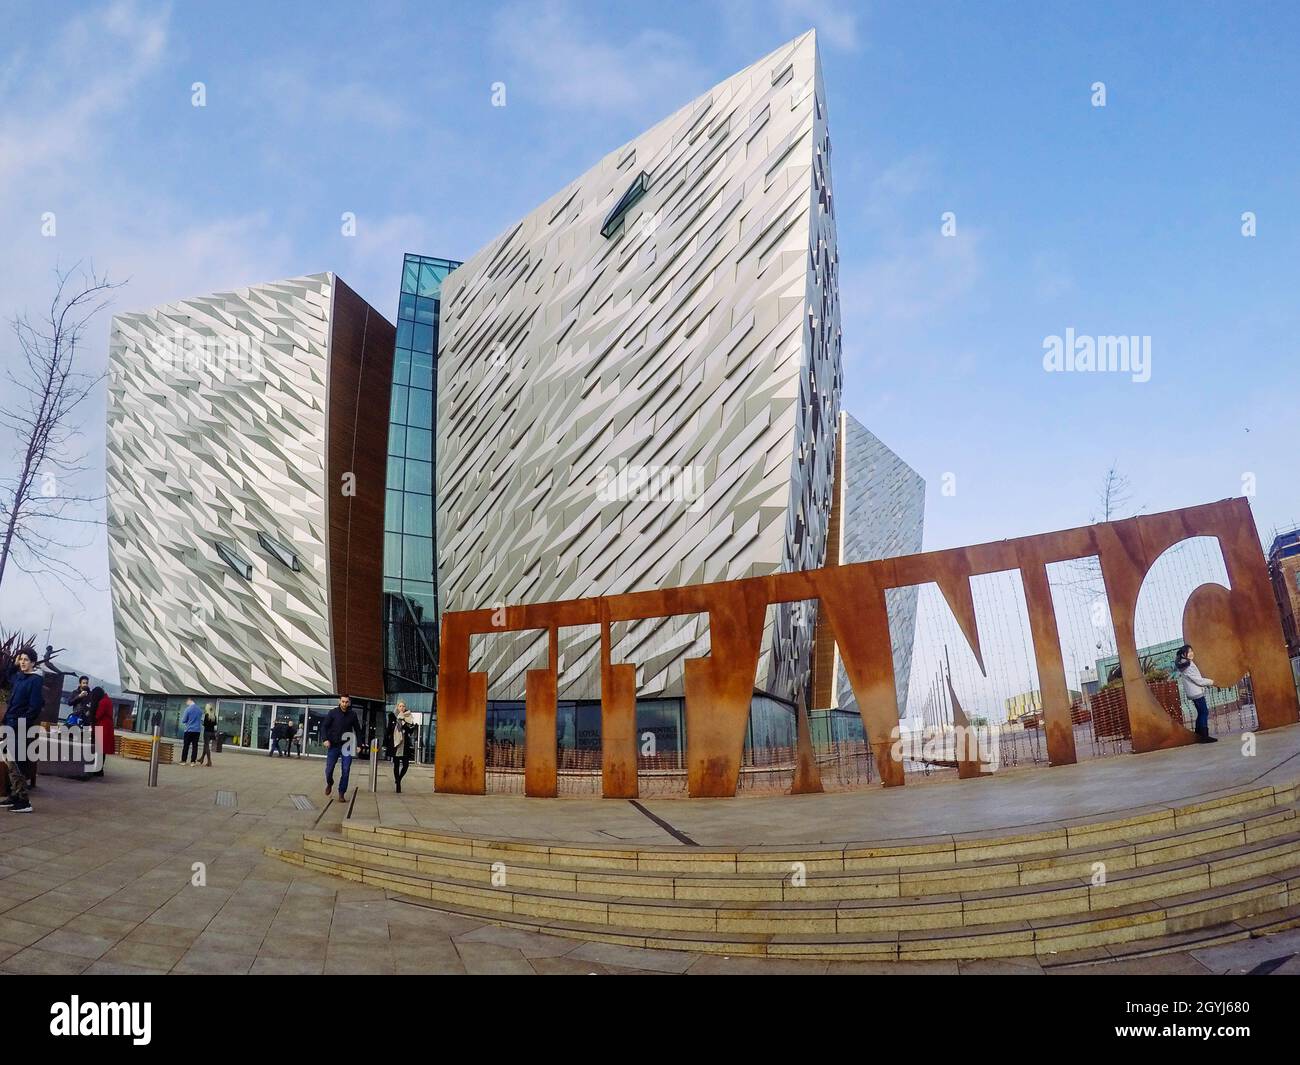 Titanic Belfast is a visitor attraction, a monument to Belfast's maritime heritage in the city's Titanic Quarter where the RMS Titanic was built. Stock Photo